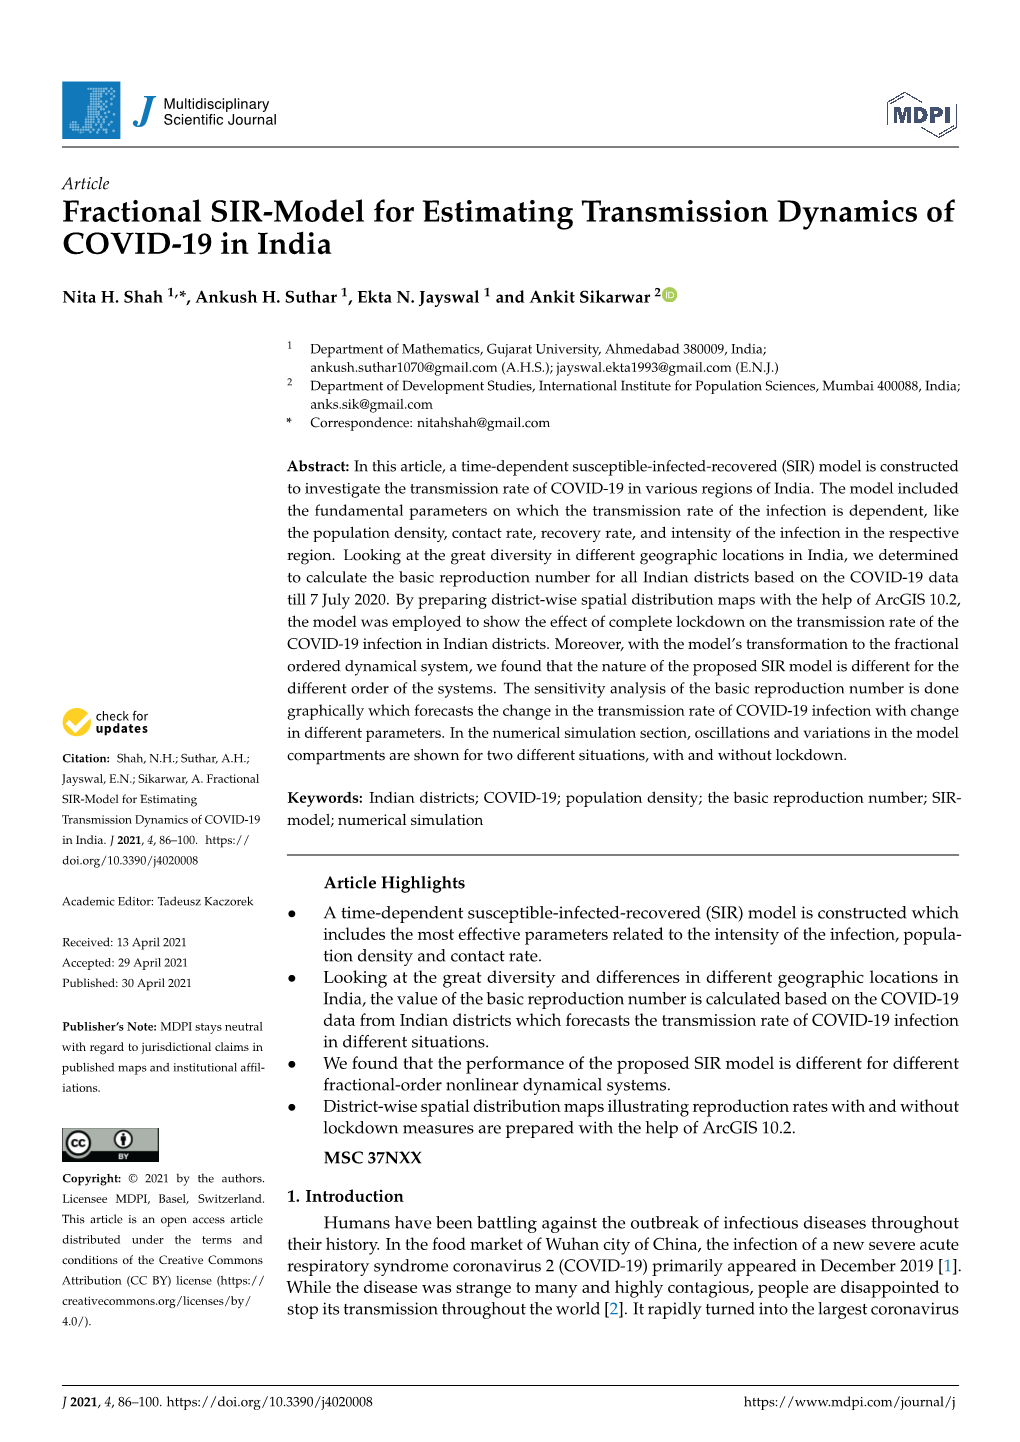 Fractional SIR-Model for Estimating Transmission Dynamics of COVID-19 in India